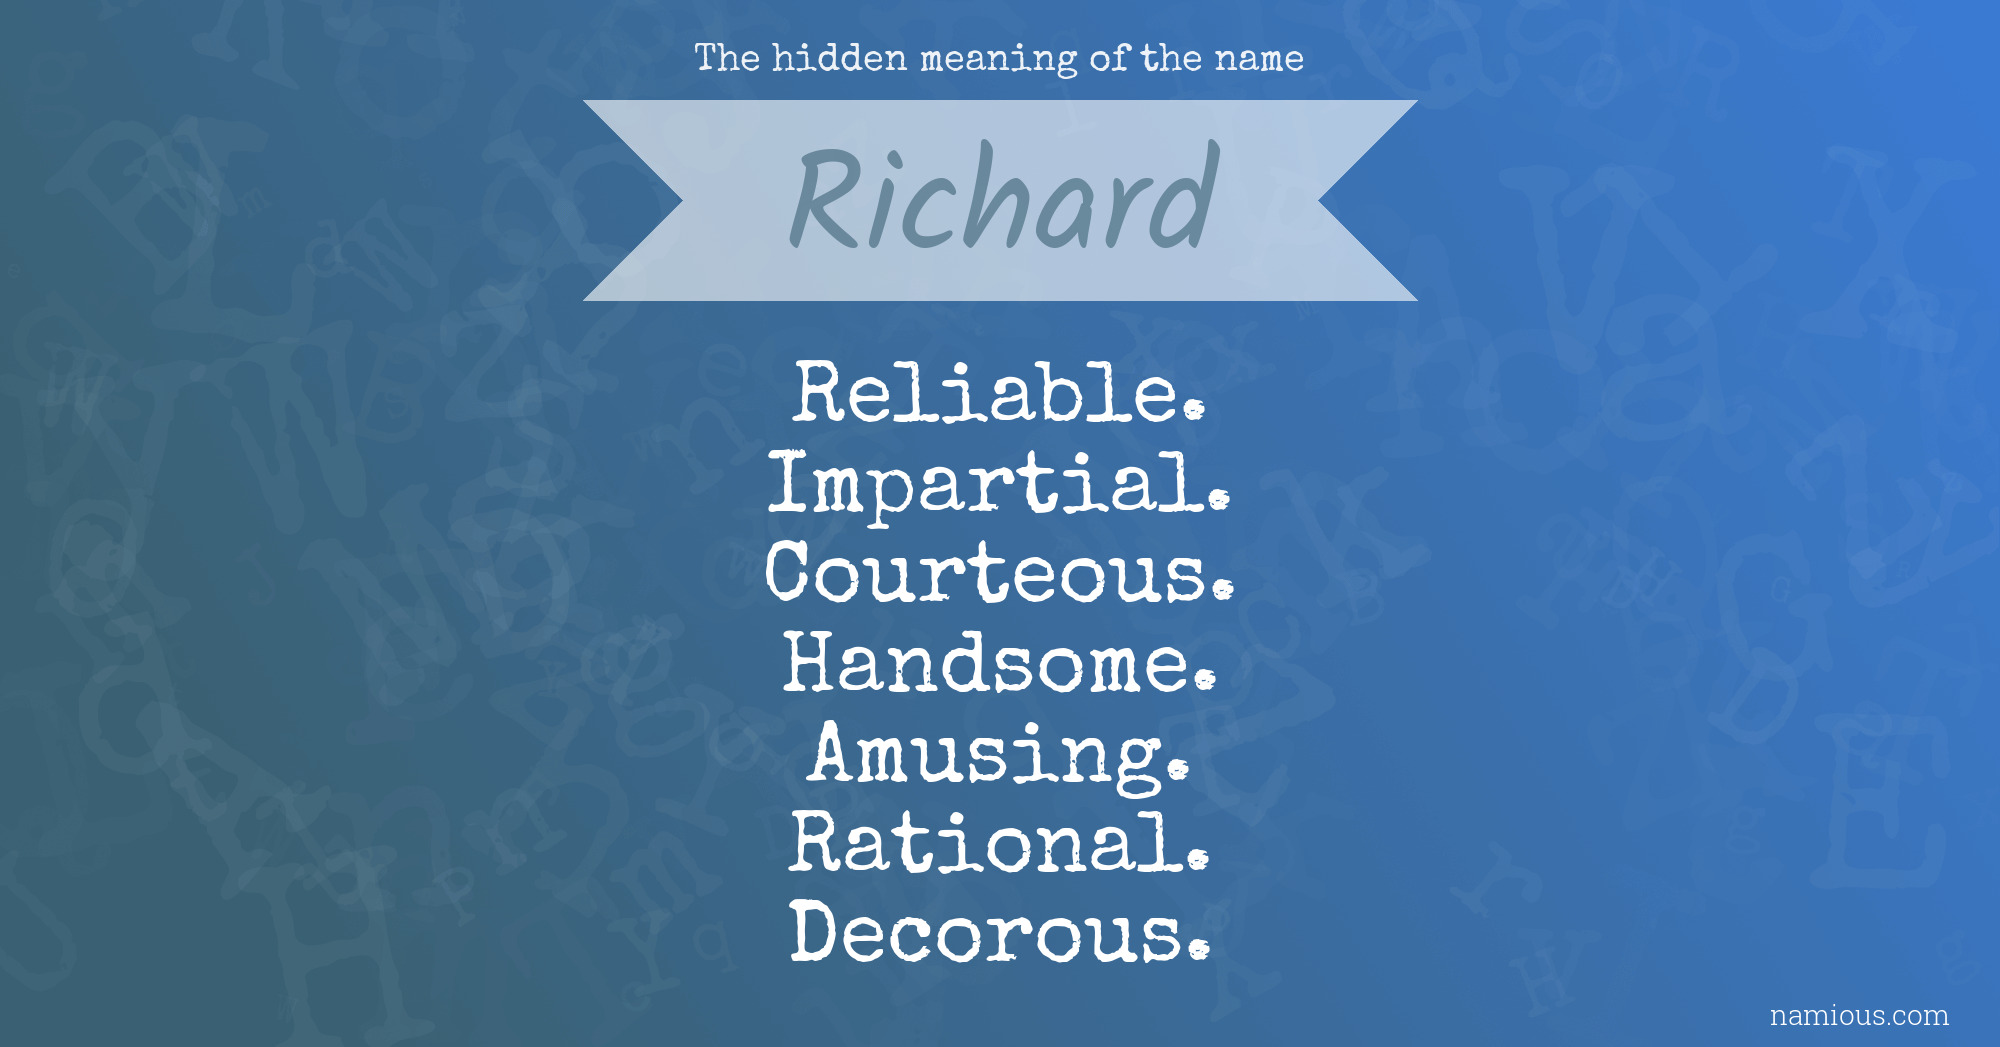 The hidden meaning of the name Richard